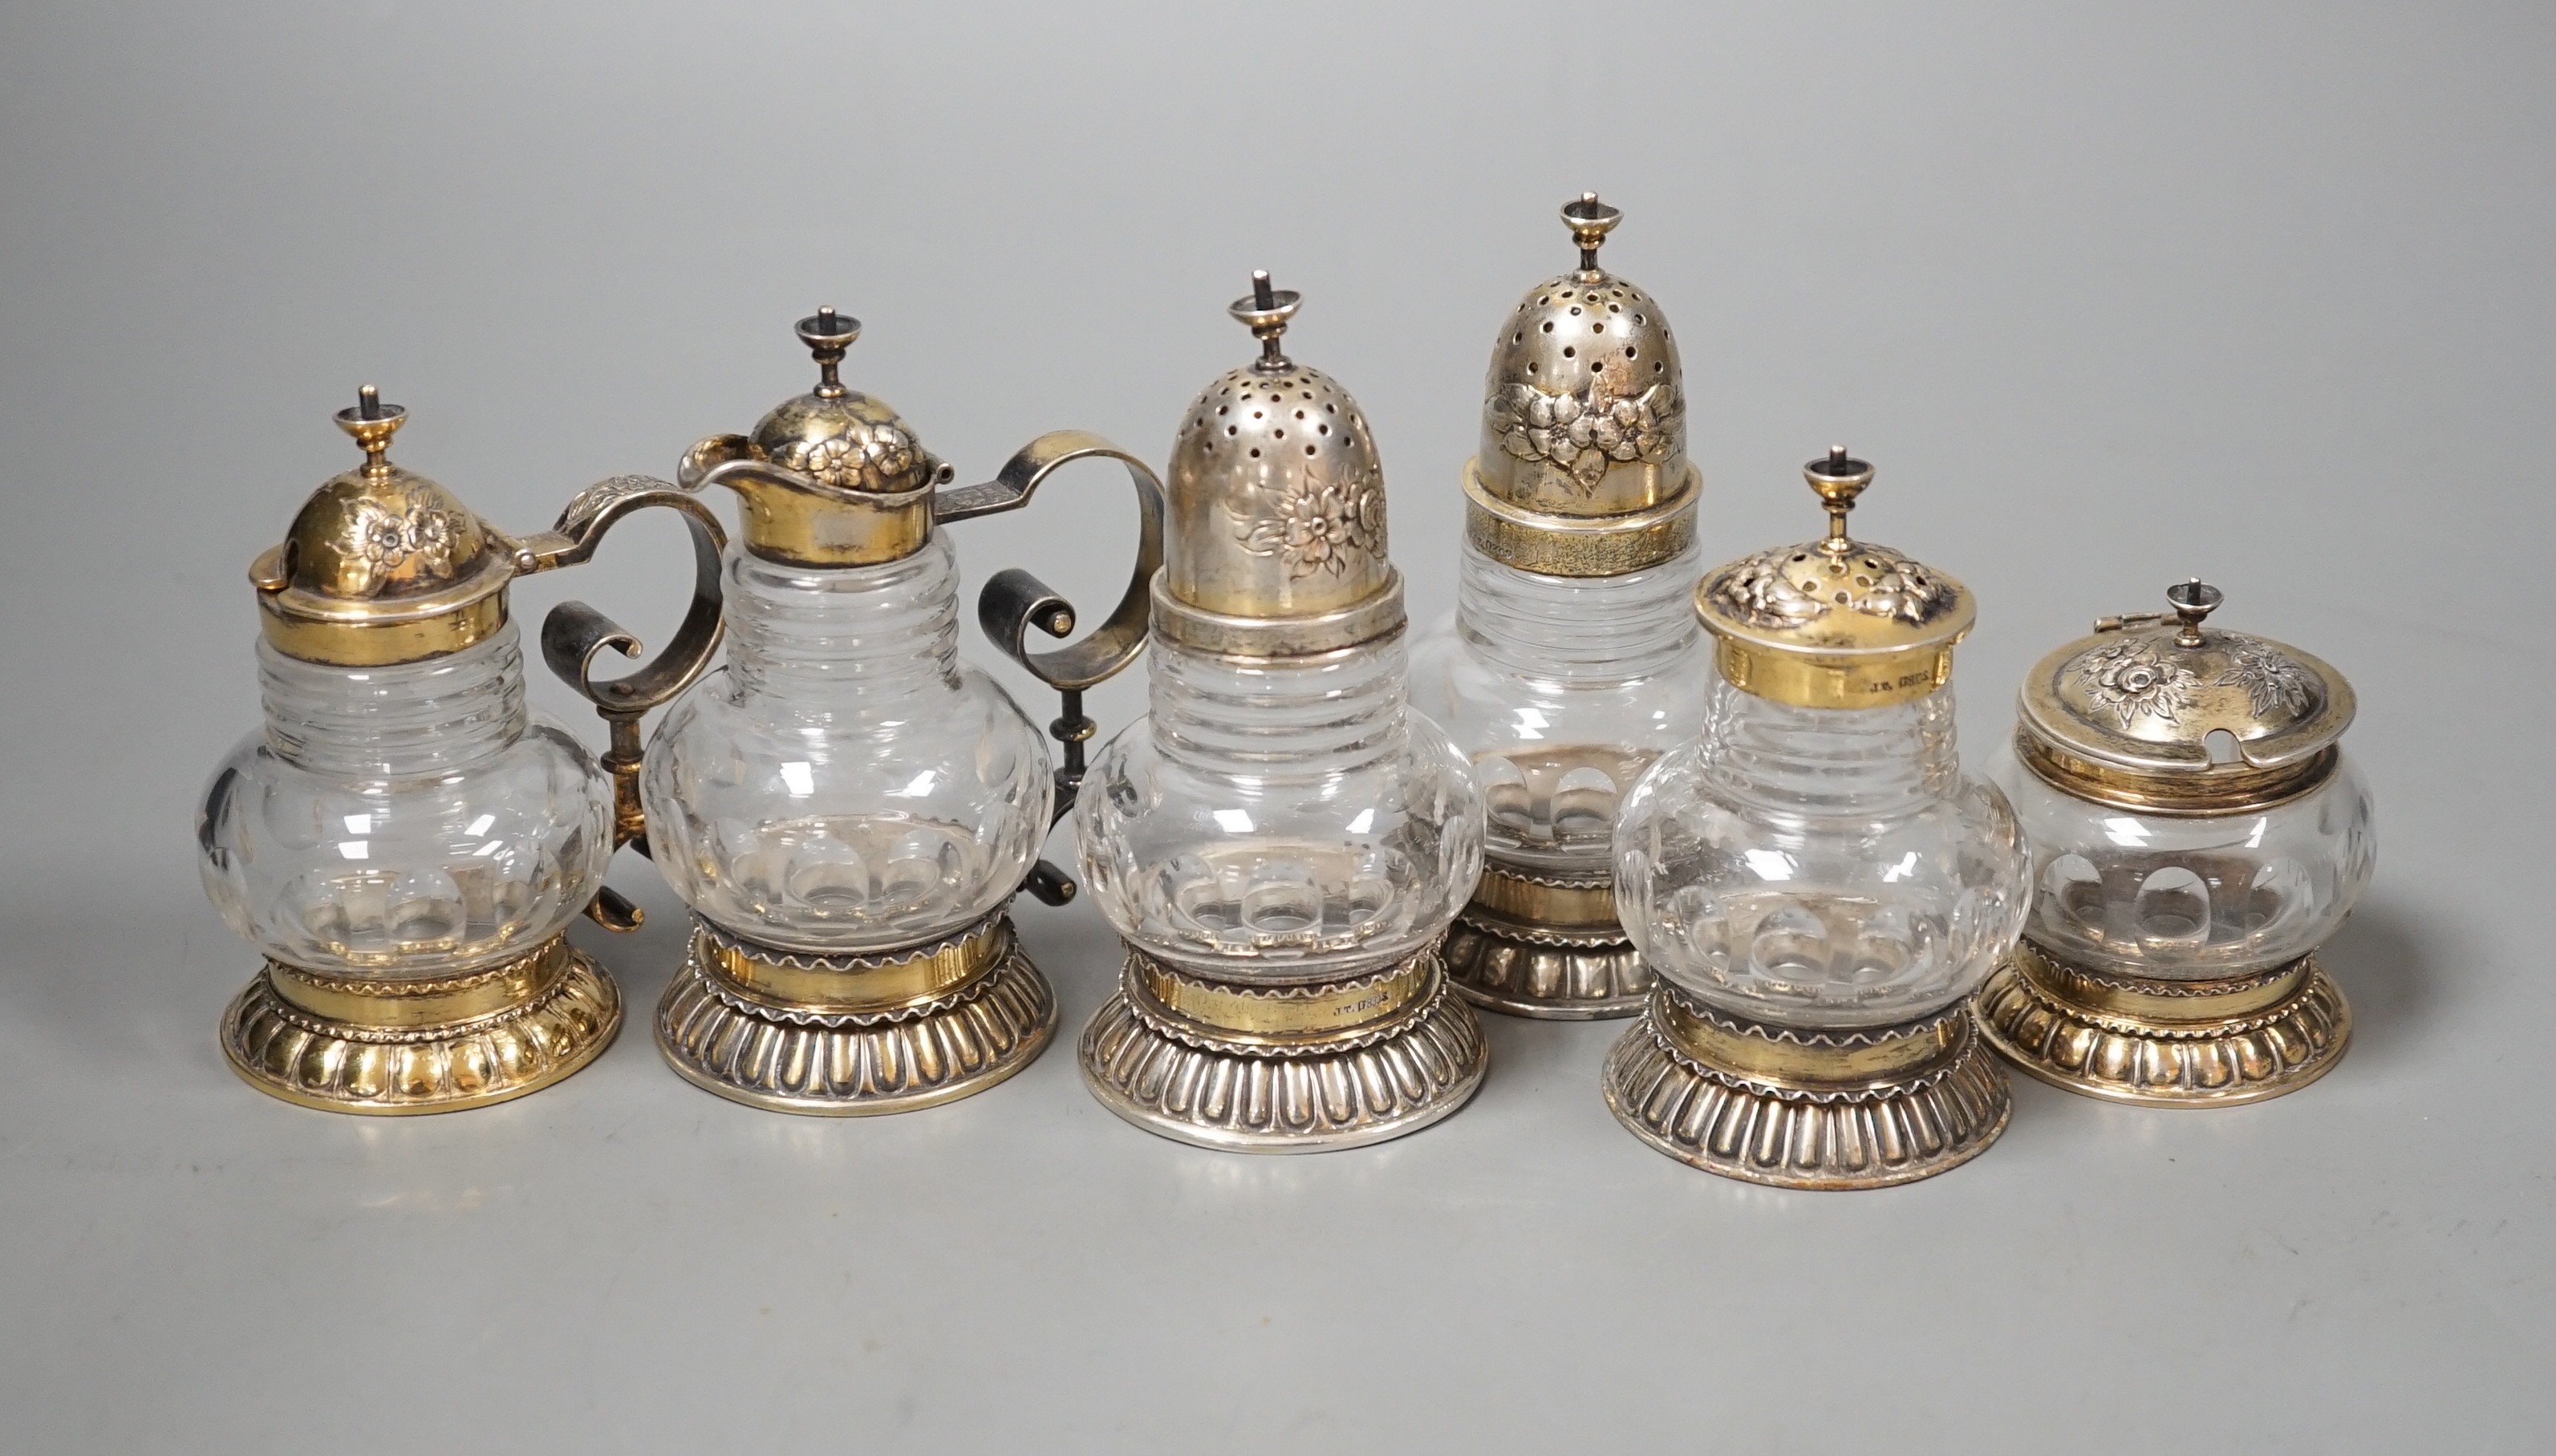 A late 19th/early 20th century Norwegian 830 standard gilt white metal mounted glass six piece cruet set, possibly by J. Tostrup, two pieces unmarked, tallest 97mm.